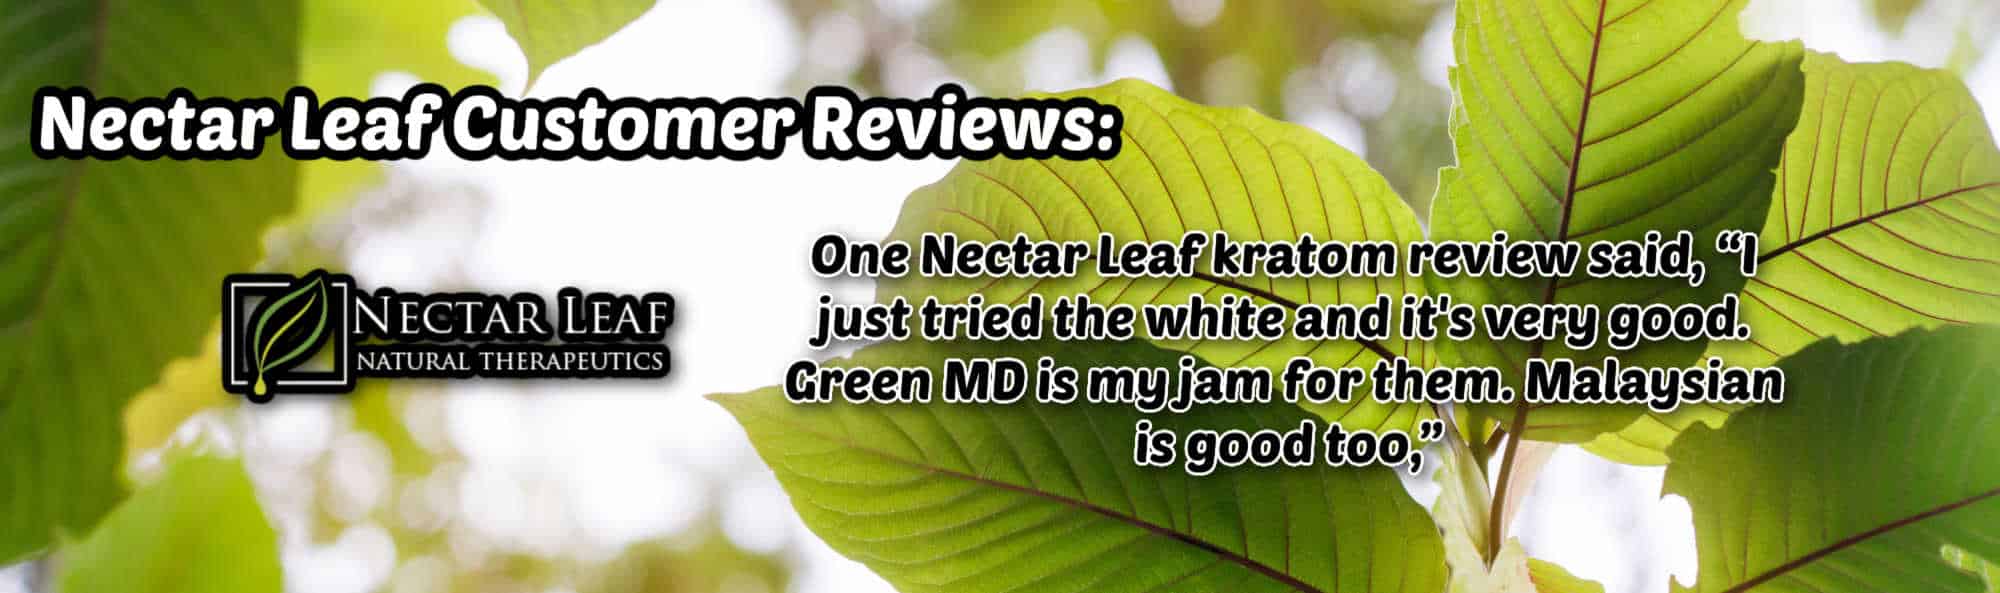 image of nectar leaf customer reviews